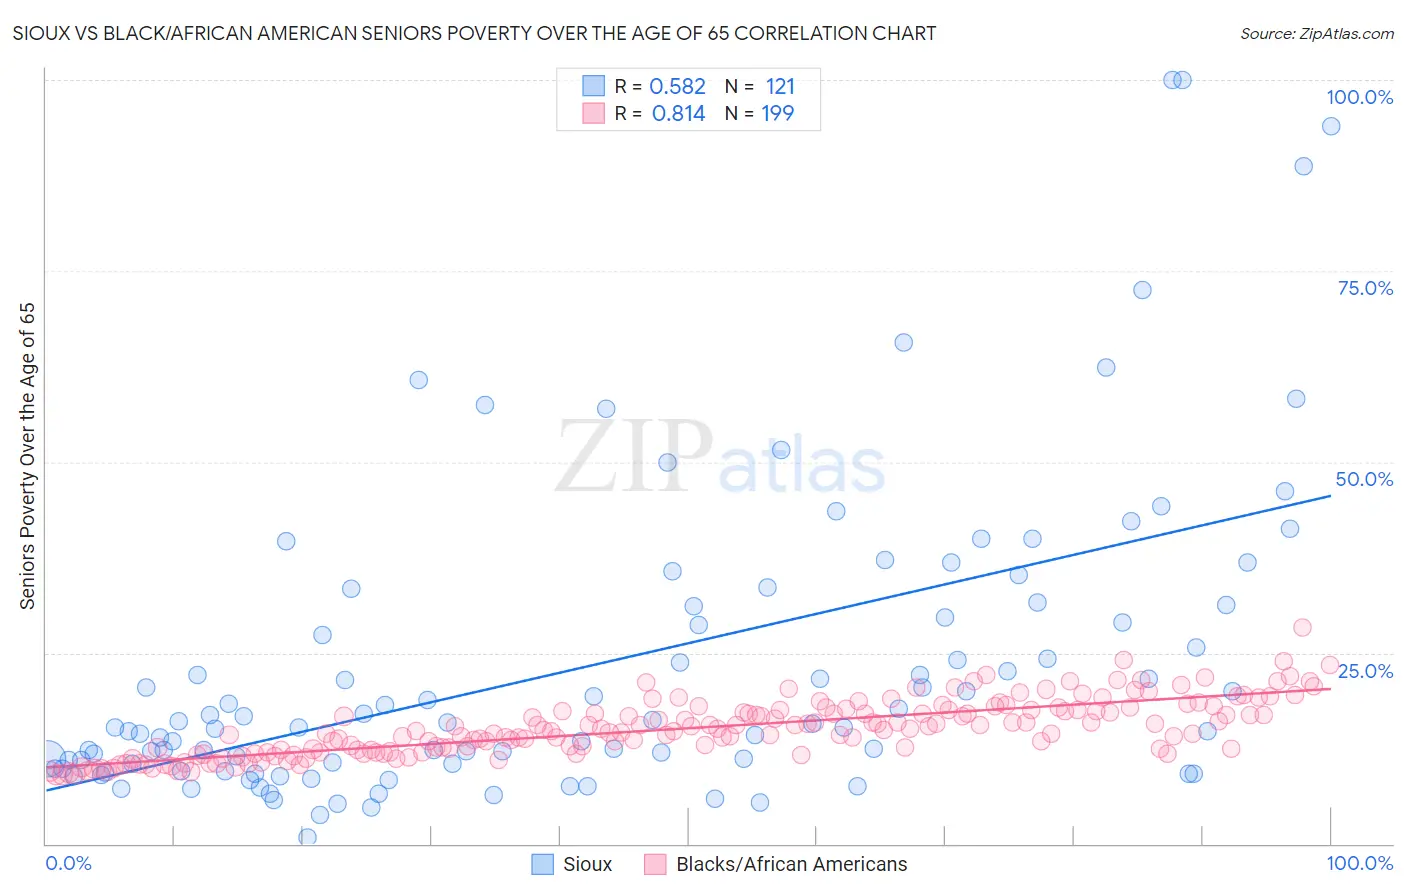 Sioux vs Black/African American Seniors Poverty Over the Age of 65